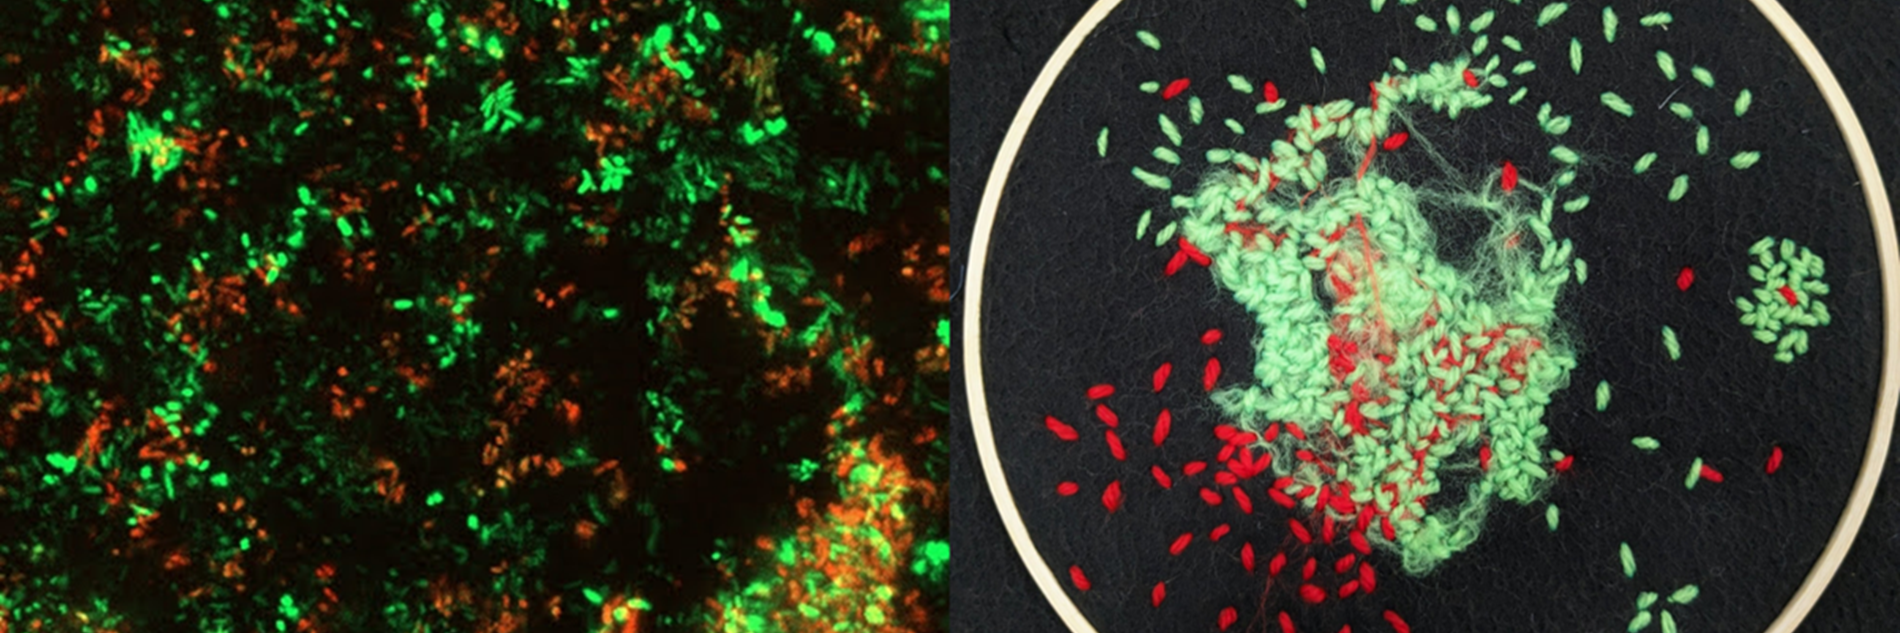 Two images (L - R) - green, yellow and brown bacteria; craft hoop with green and red stitches 